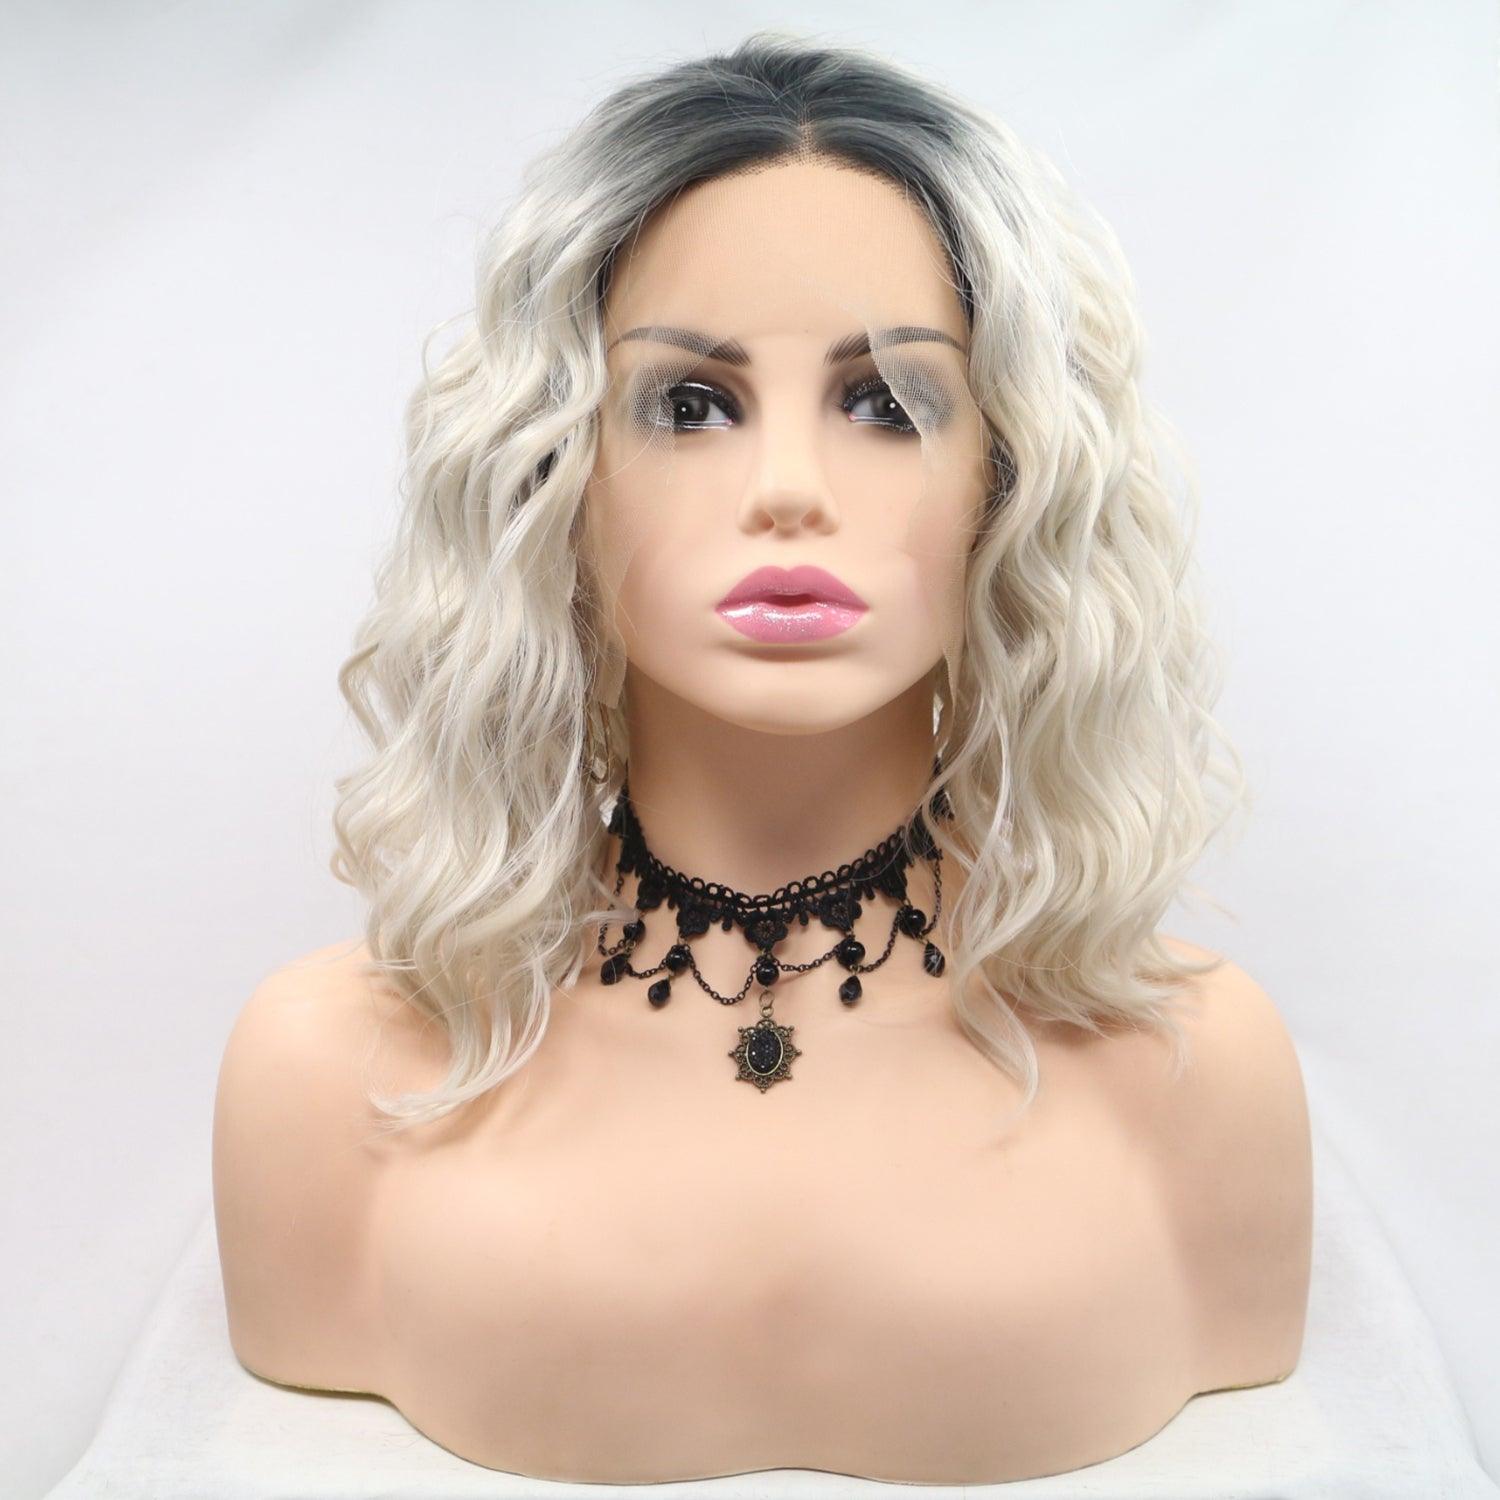 a mannequin head with white hair and a black necklace